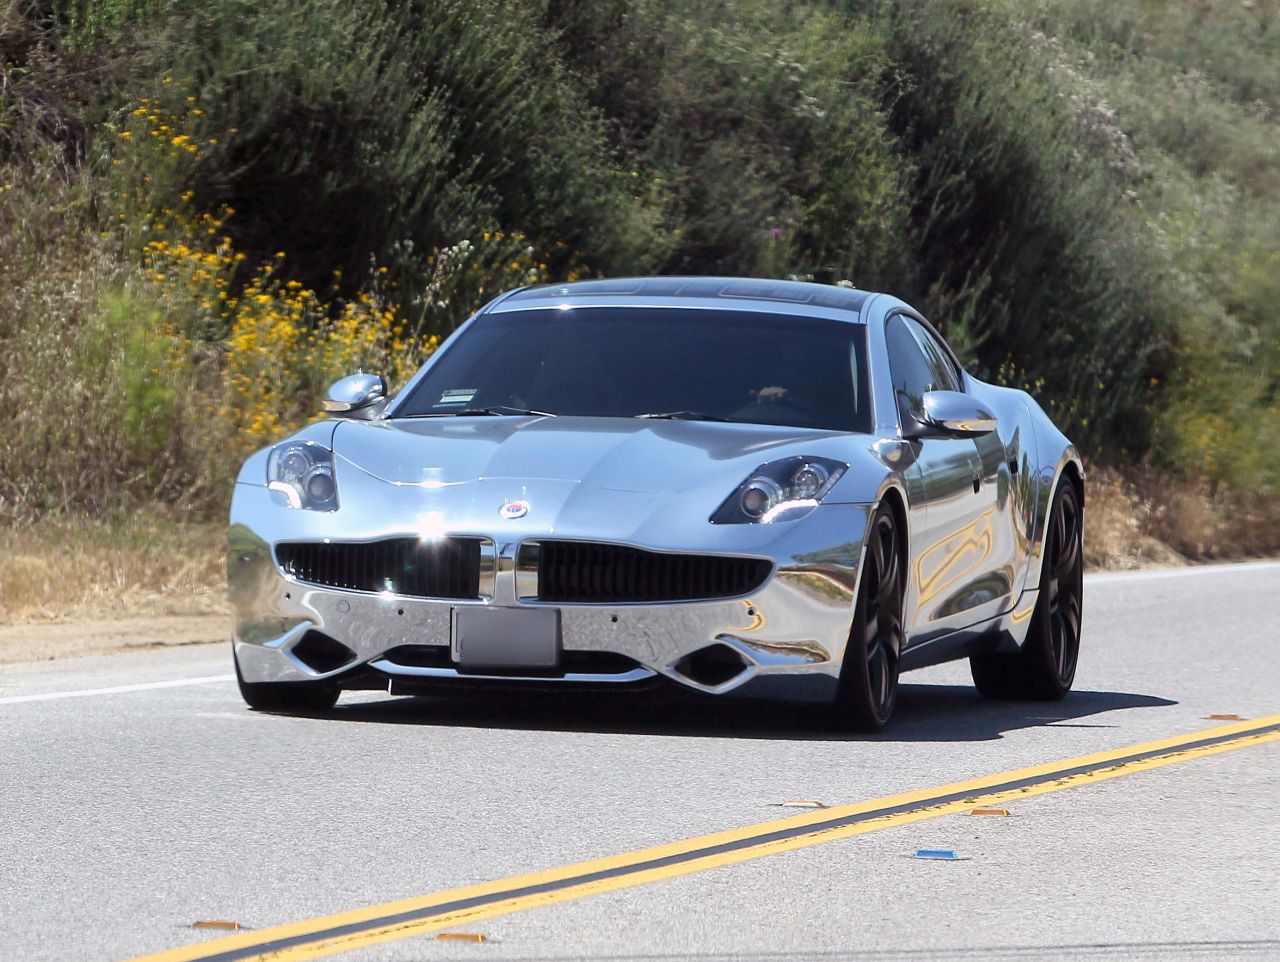 When you're Justin Bieber, you get a $100,000 electric sports car for your 18th birthday -- and on<a href="http://marquee.blogs.cnn.com/2012/03/01/justin-bieber-gets-birthday-surprise-on-ellen/"> Ellen DeGeneres' talk show</a>, no less. 